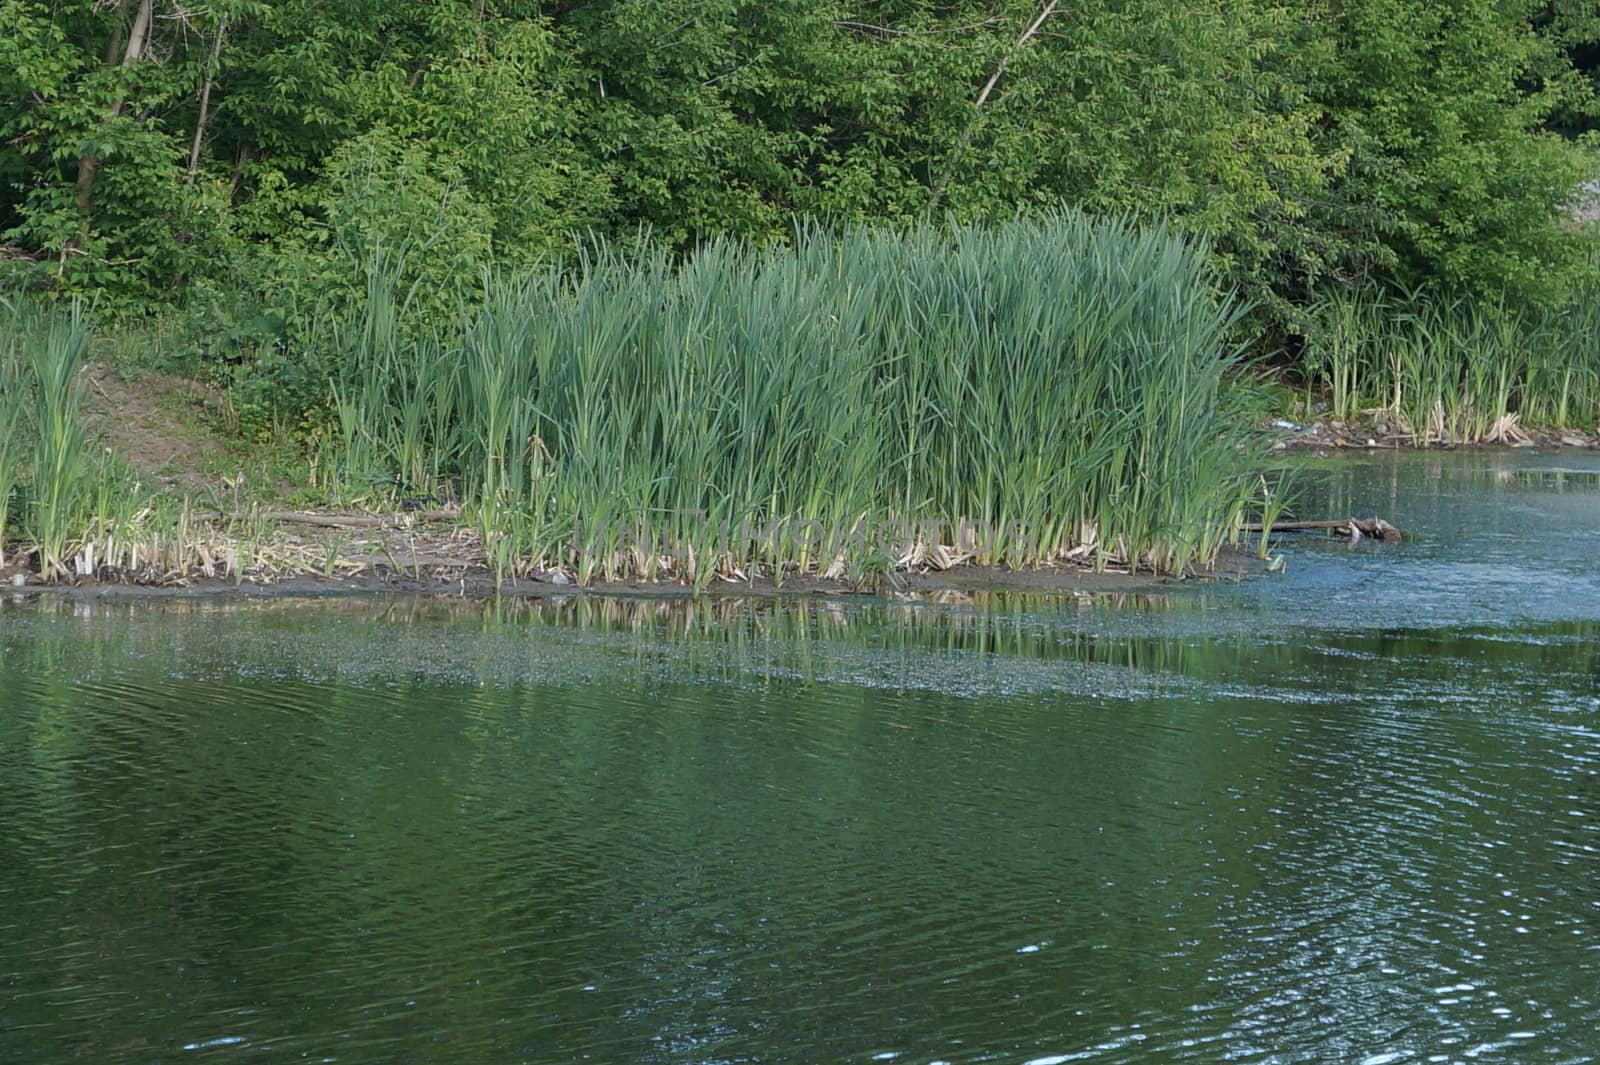 Summer landscape, green reeds in the water near the shore of the pond